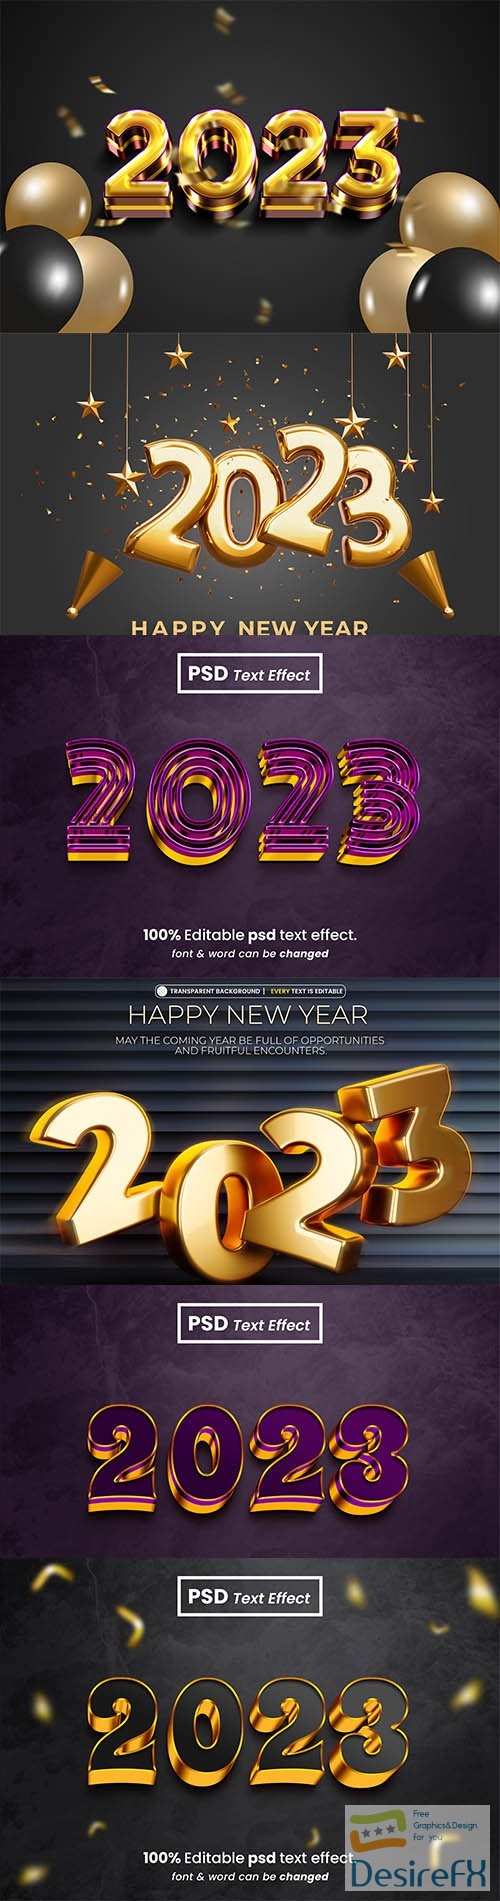 2023 new year gold 3d editable psd text effect